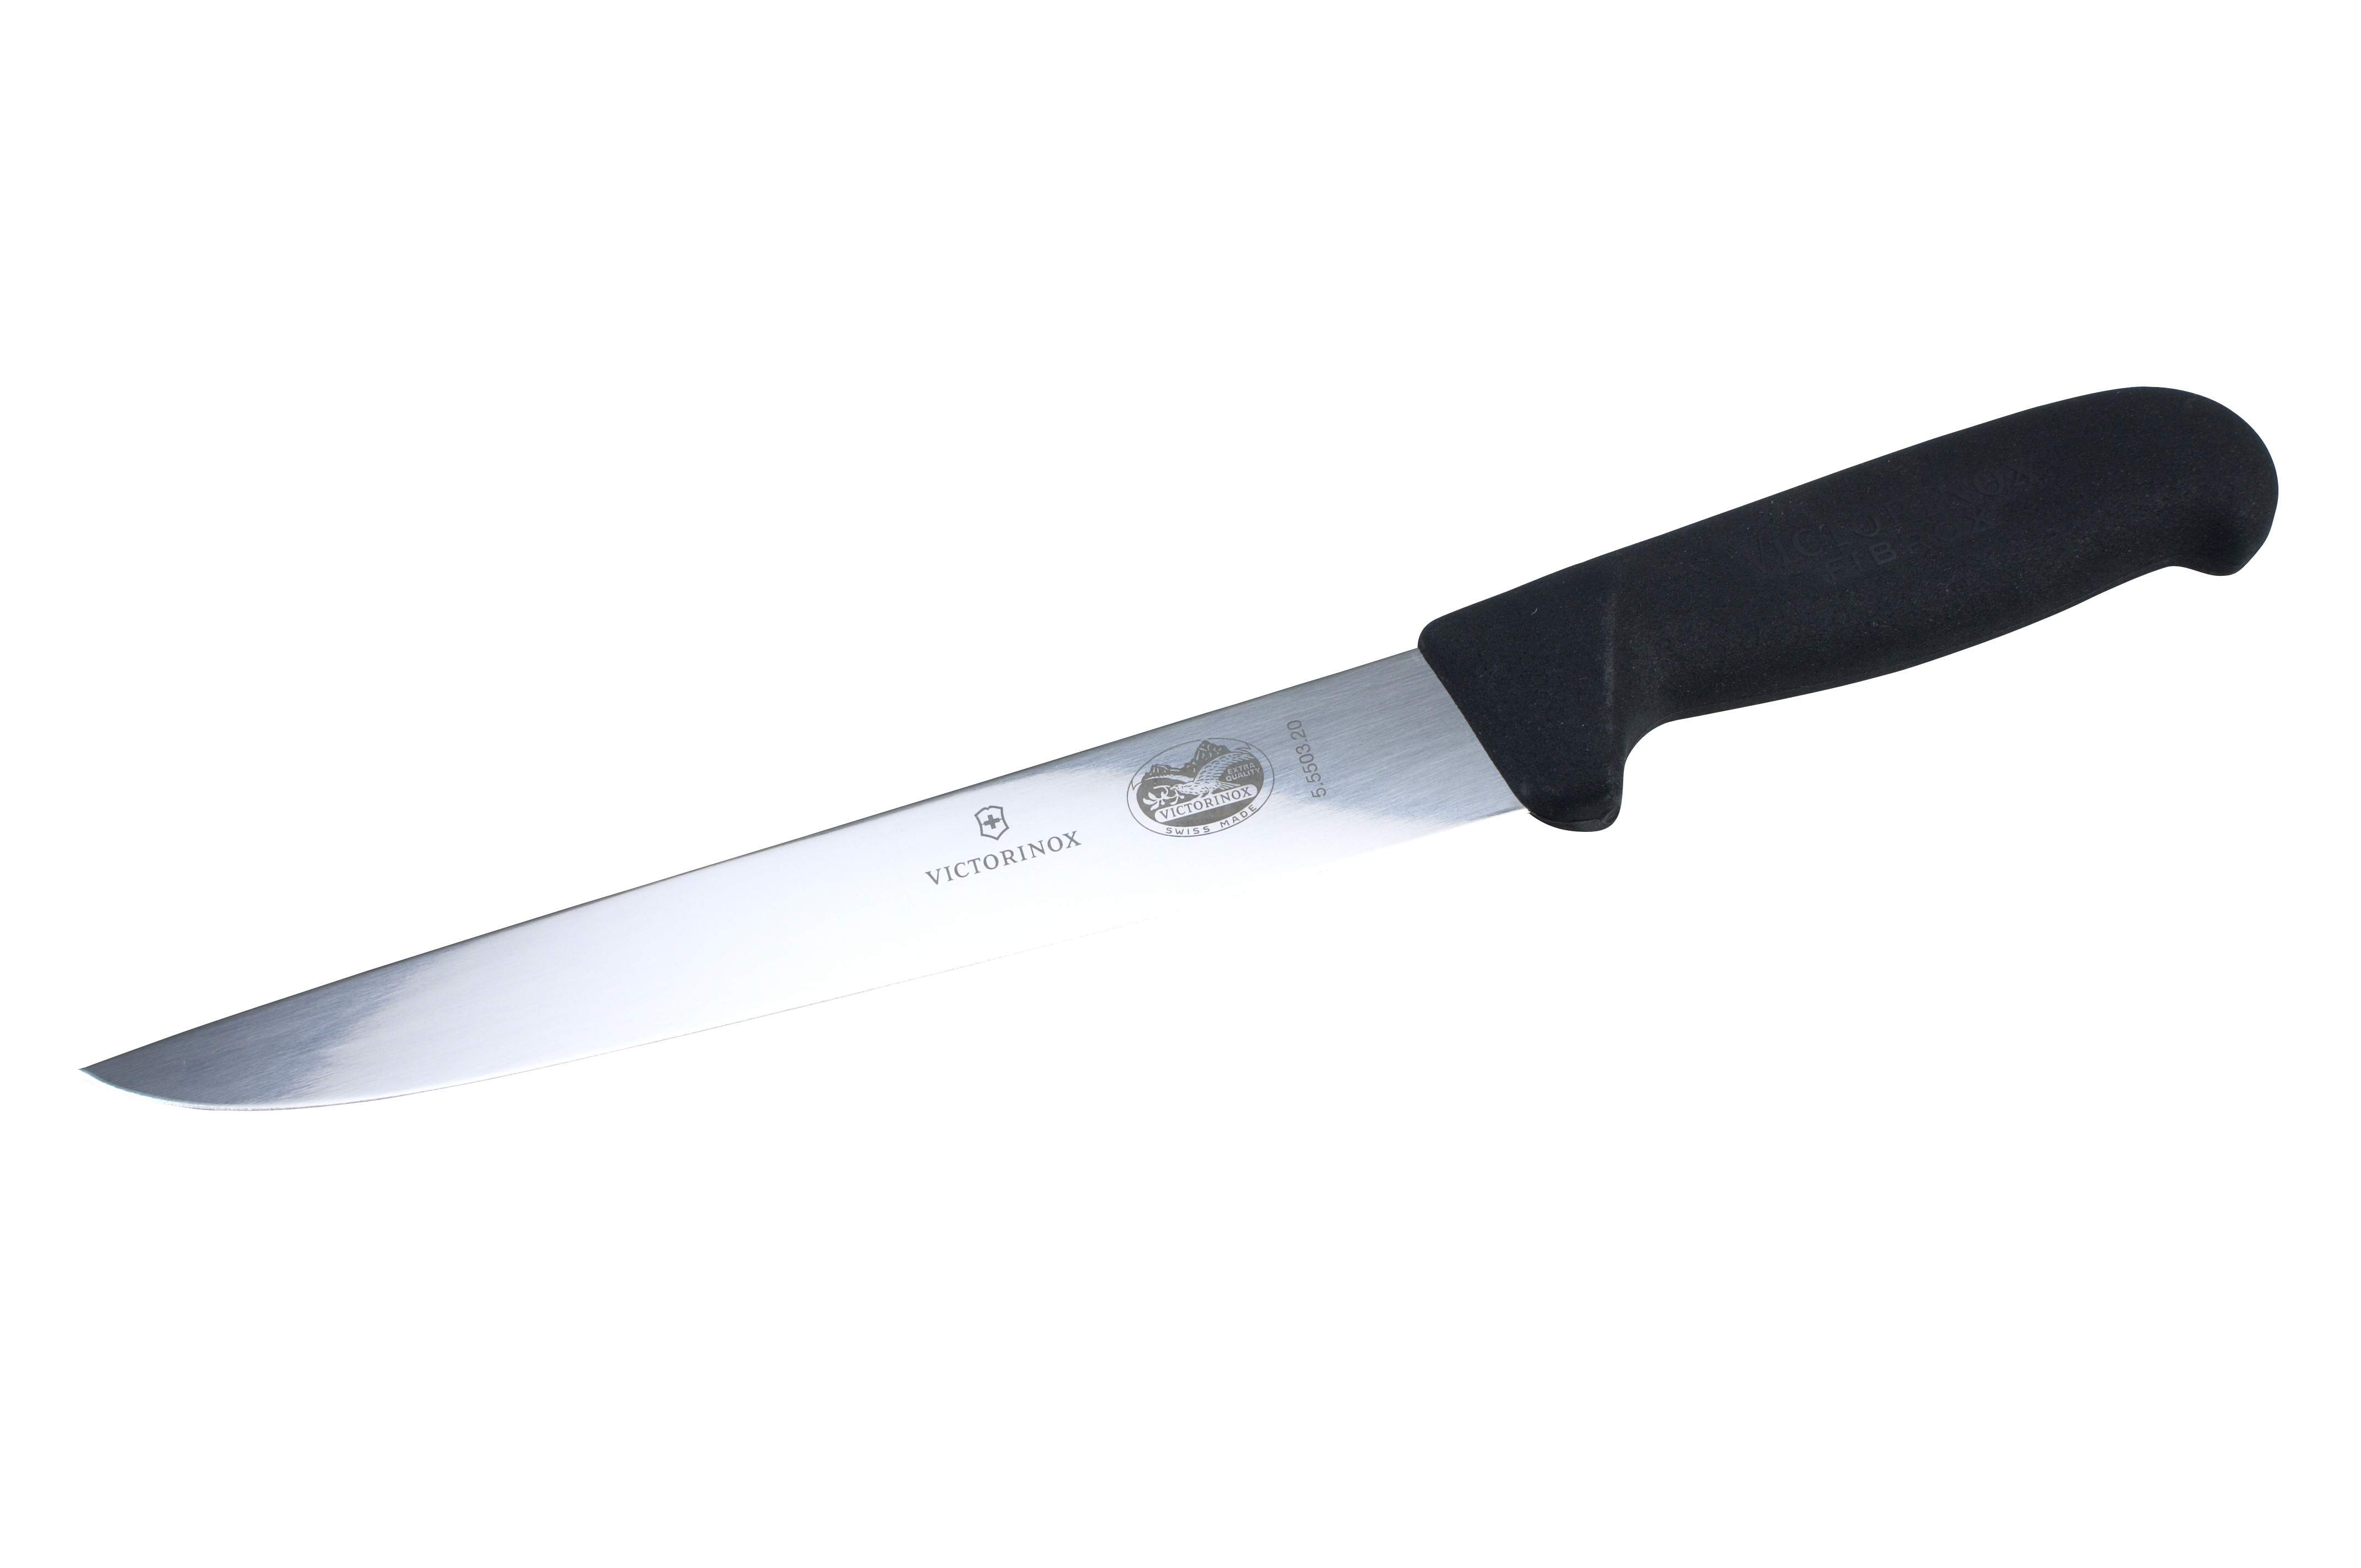 Autopsy knife 21 cm pointed